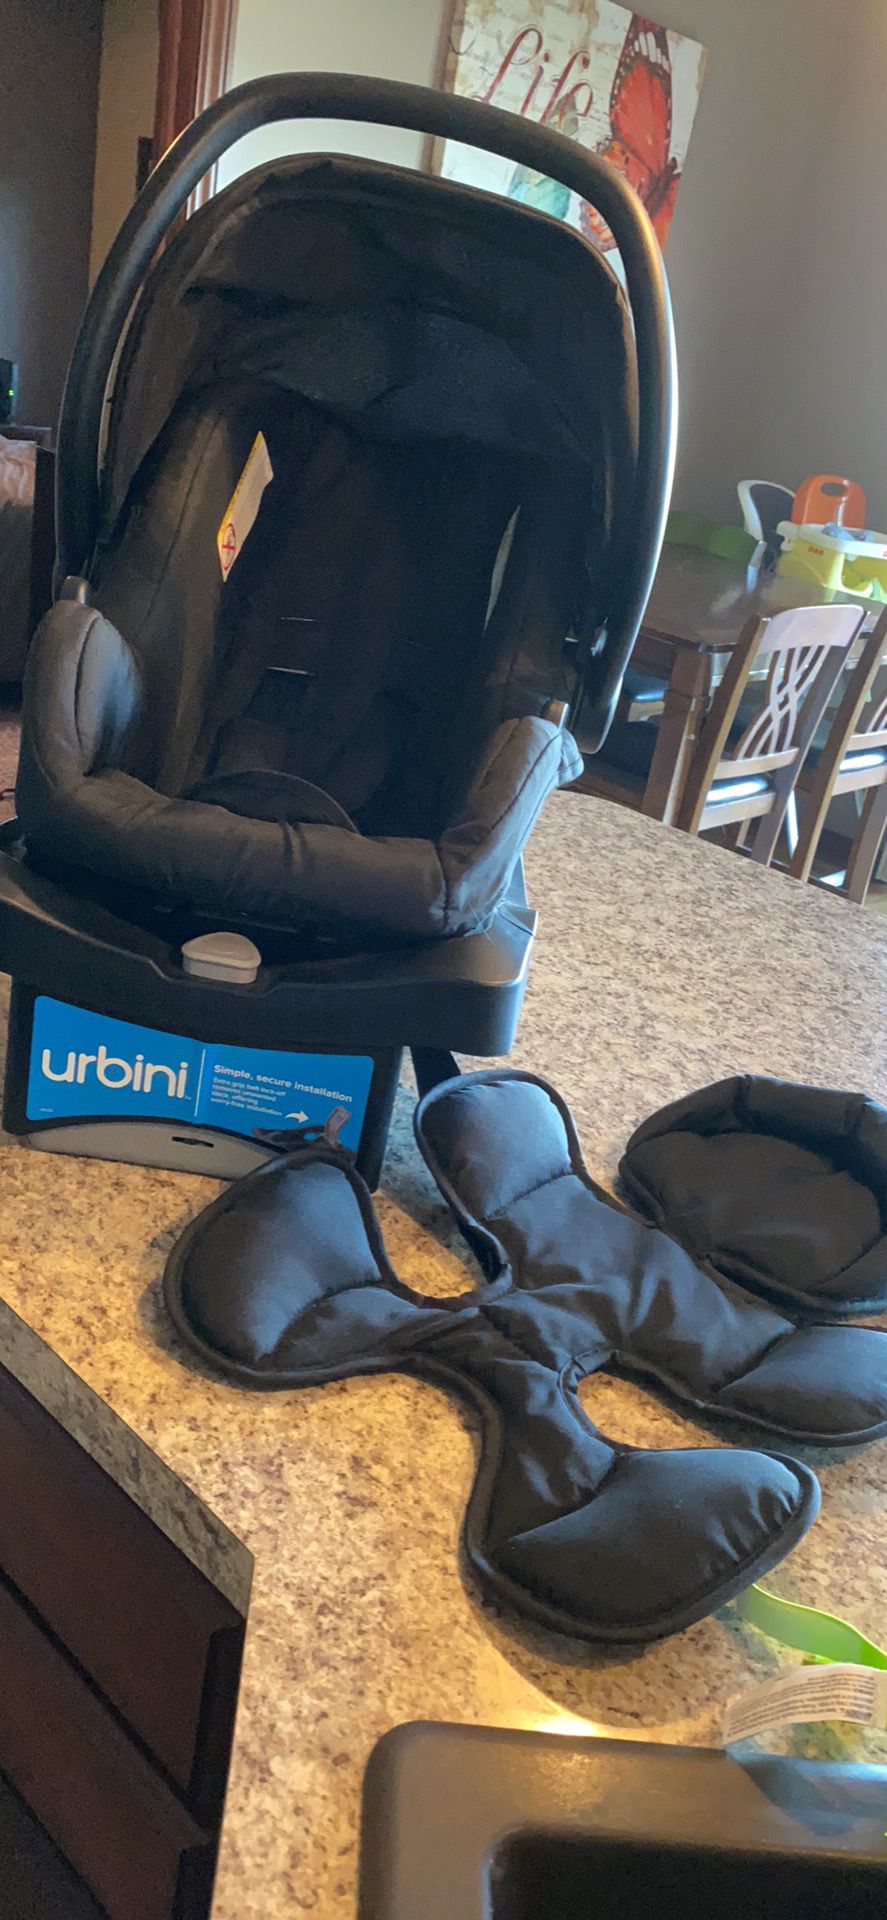 Urbini infant & Car seat set with stroller attachment